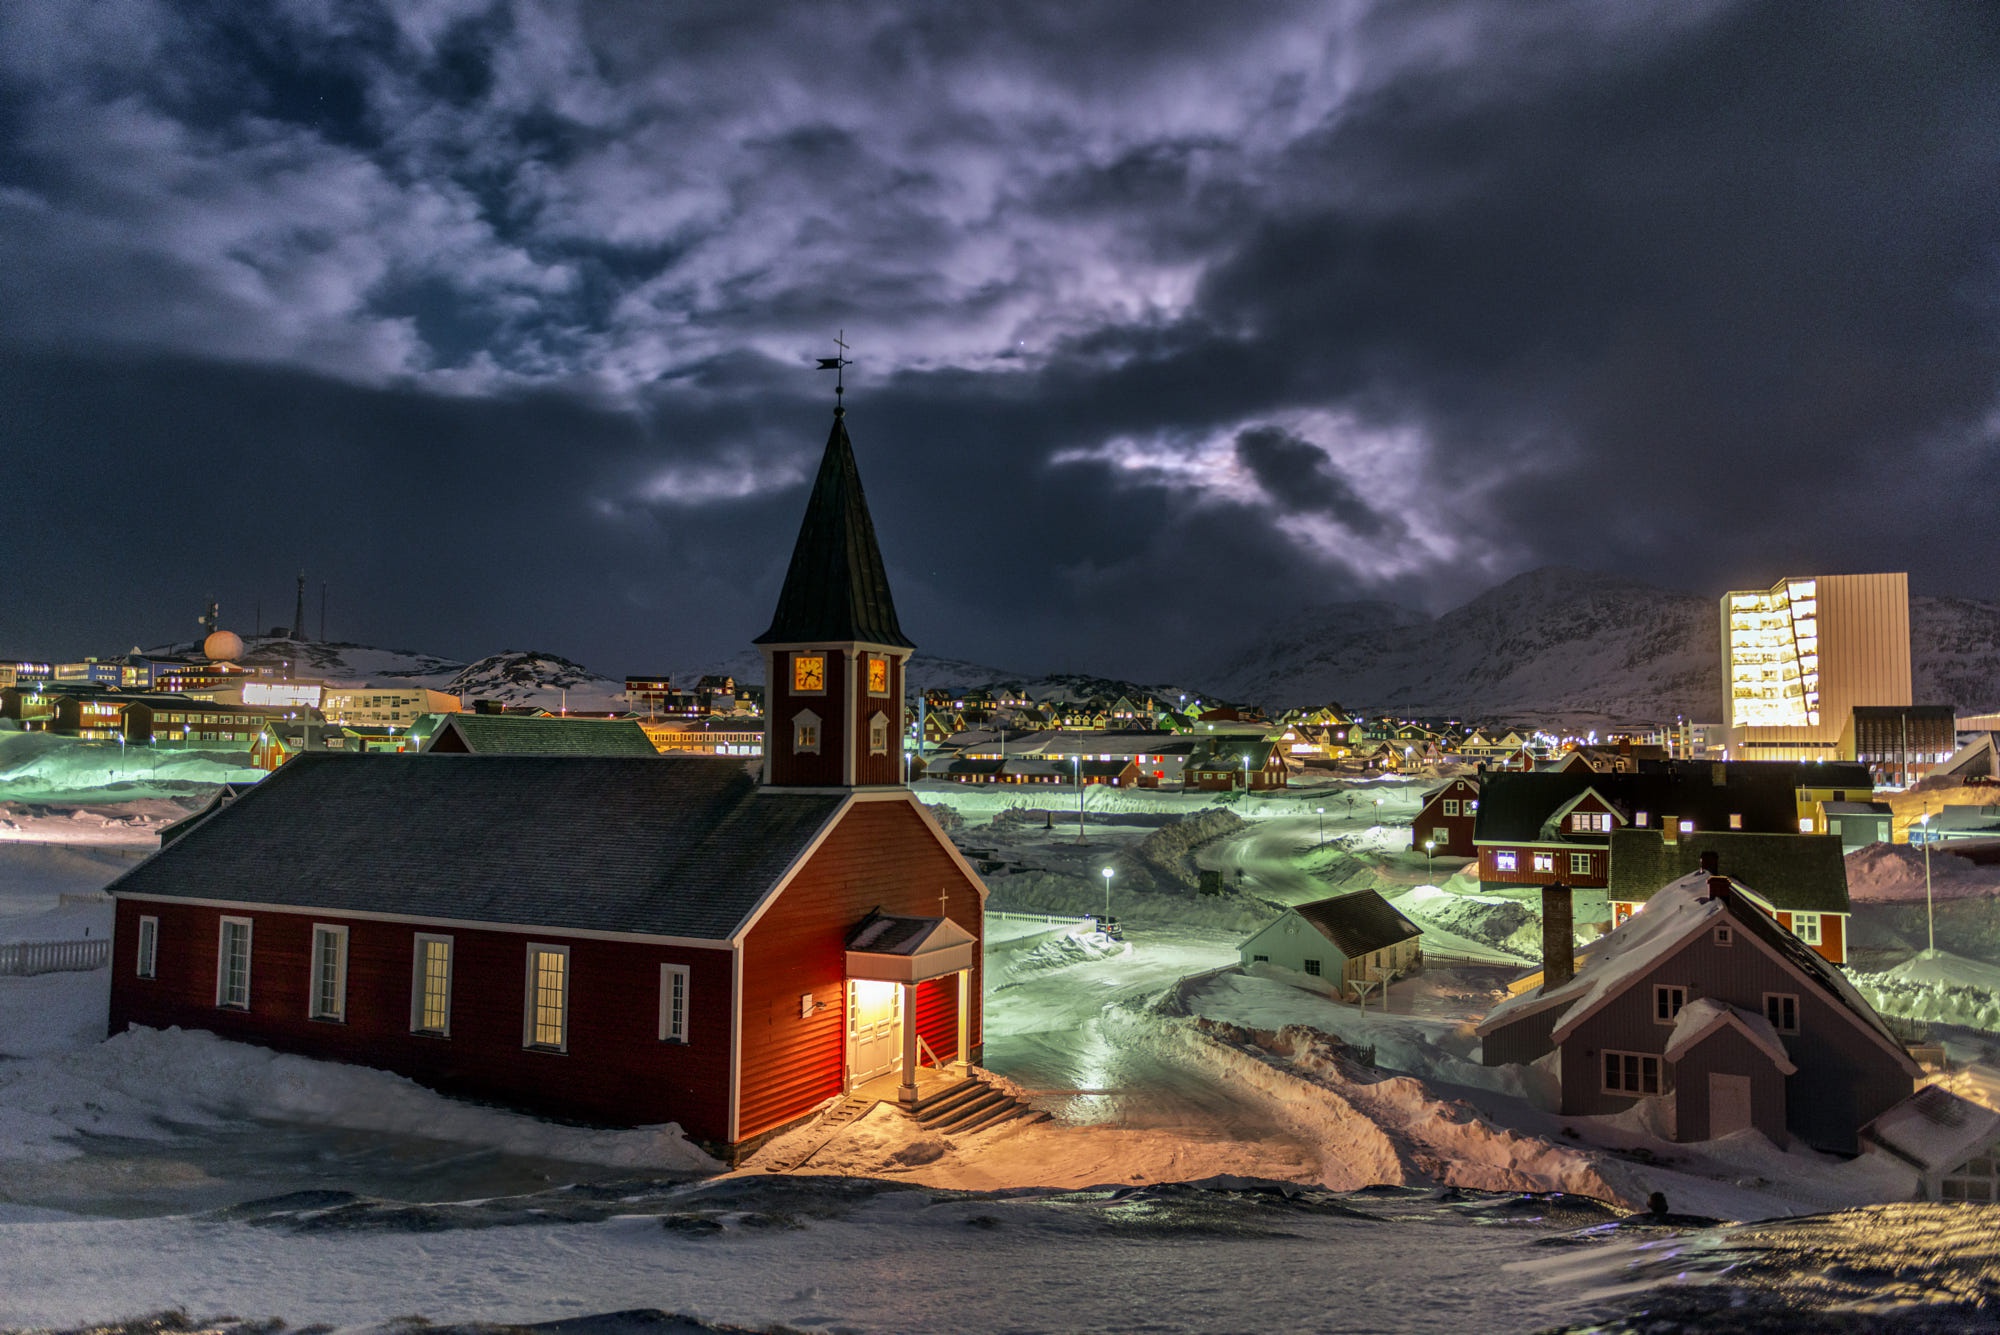 HD wallpaper greenland, denmark, religious, cathedral, church, city, mountain, night, snow